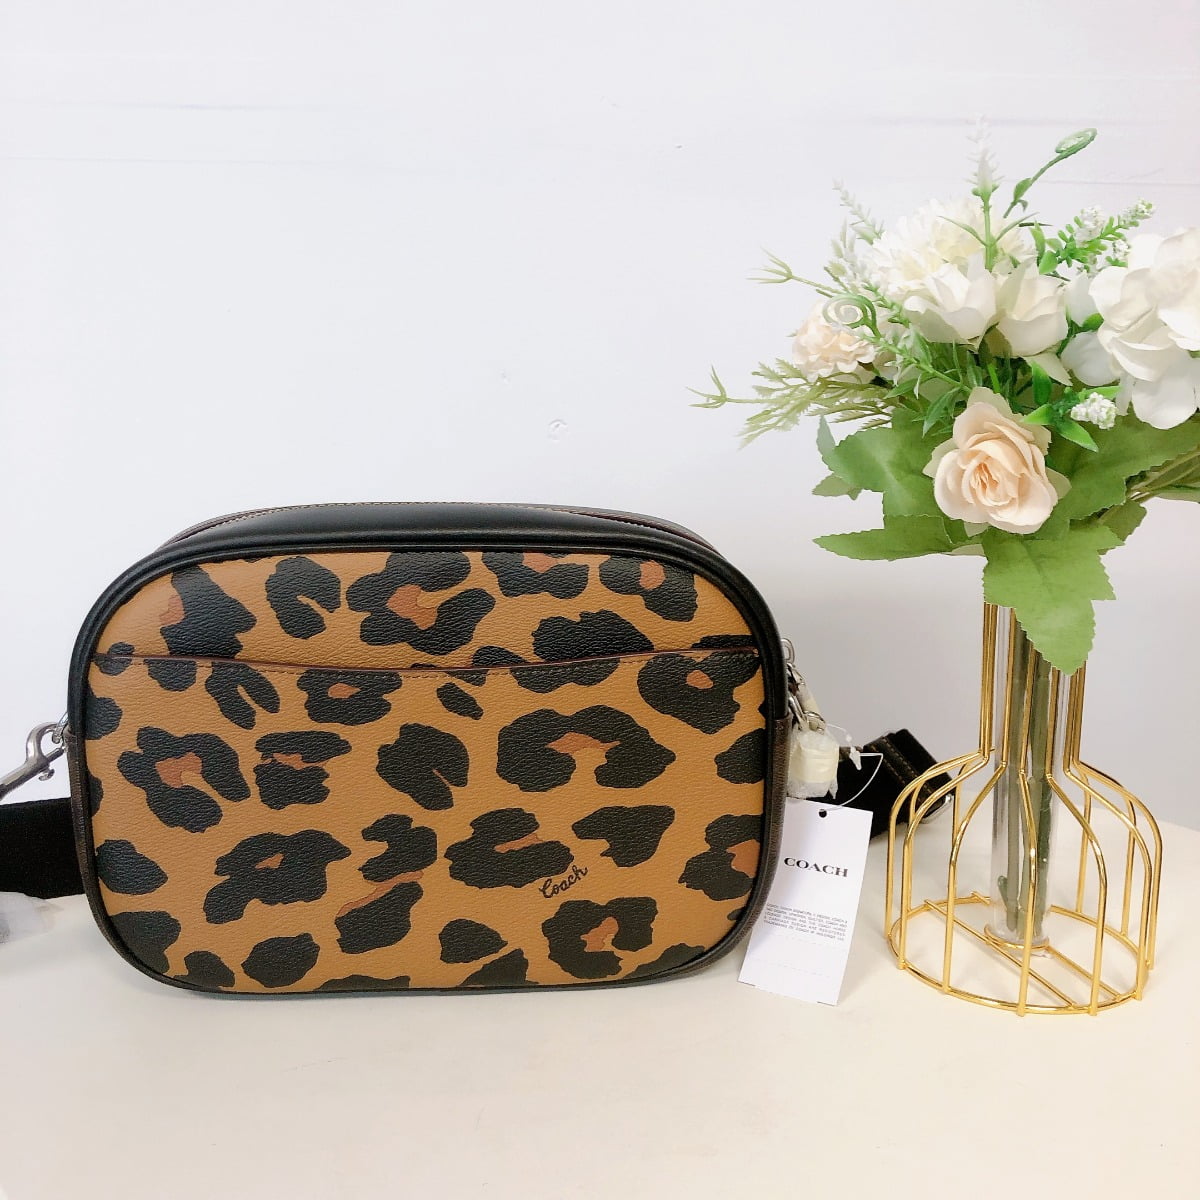 Coach leopard pattern clutchbag, Women's Fashion, Bags & Wallets, Clutches  on Carousell